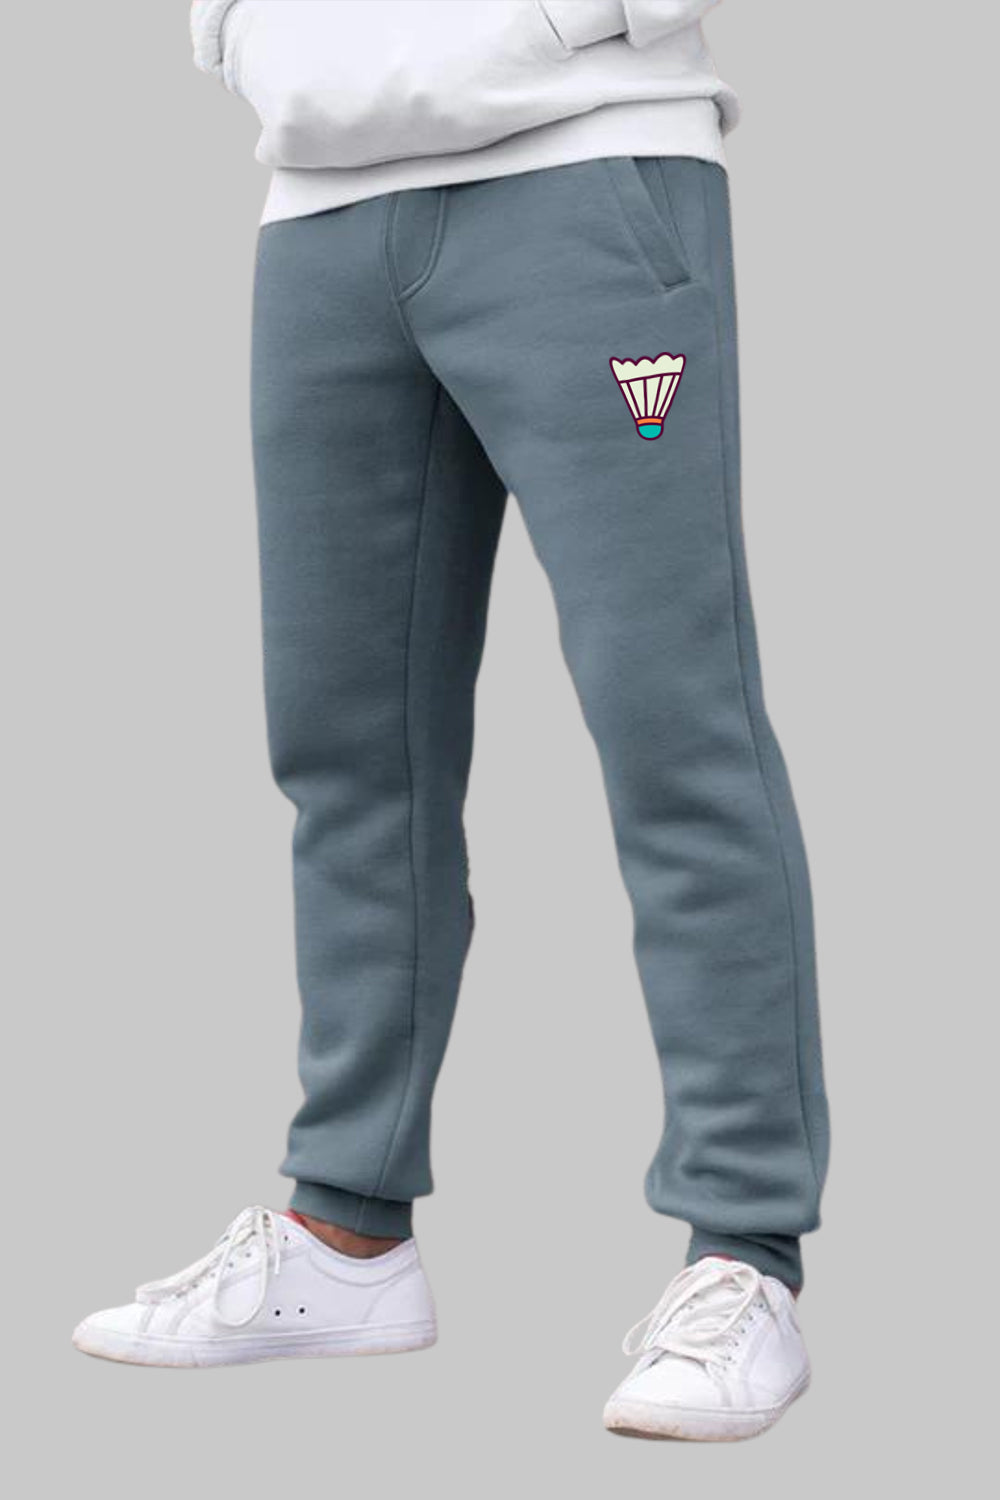 Shuttlecock Graphic Printed Blue Grey Joggers